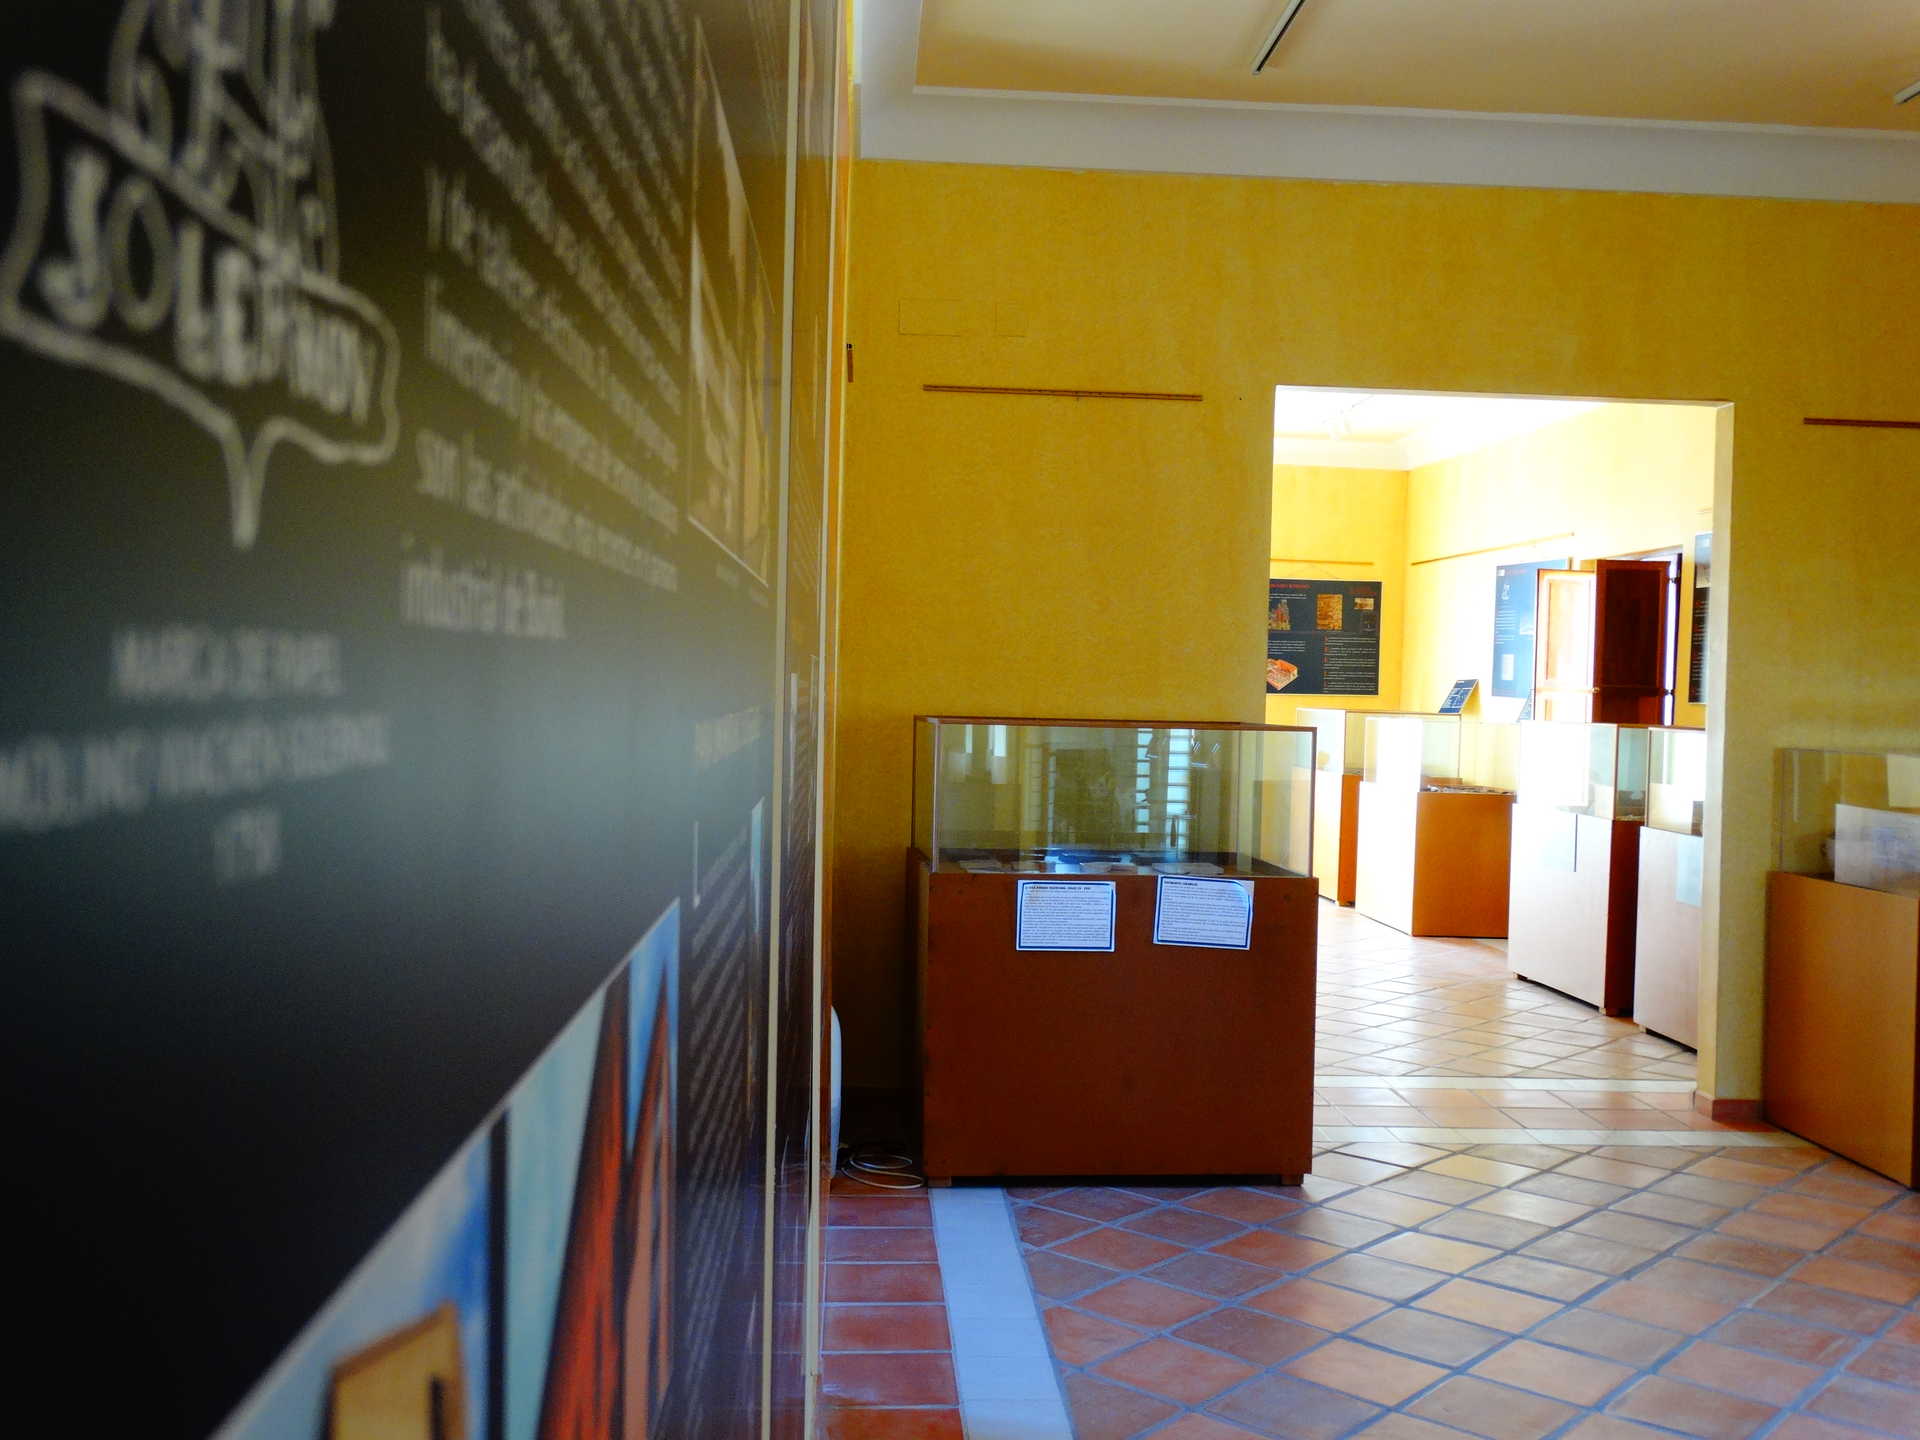 Museum Collection of Buñol